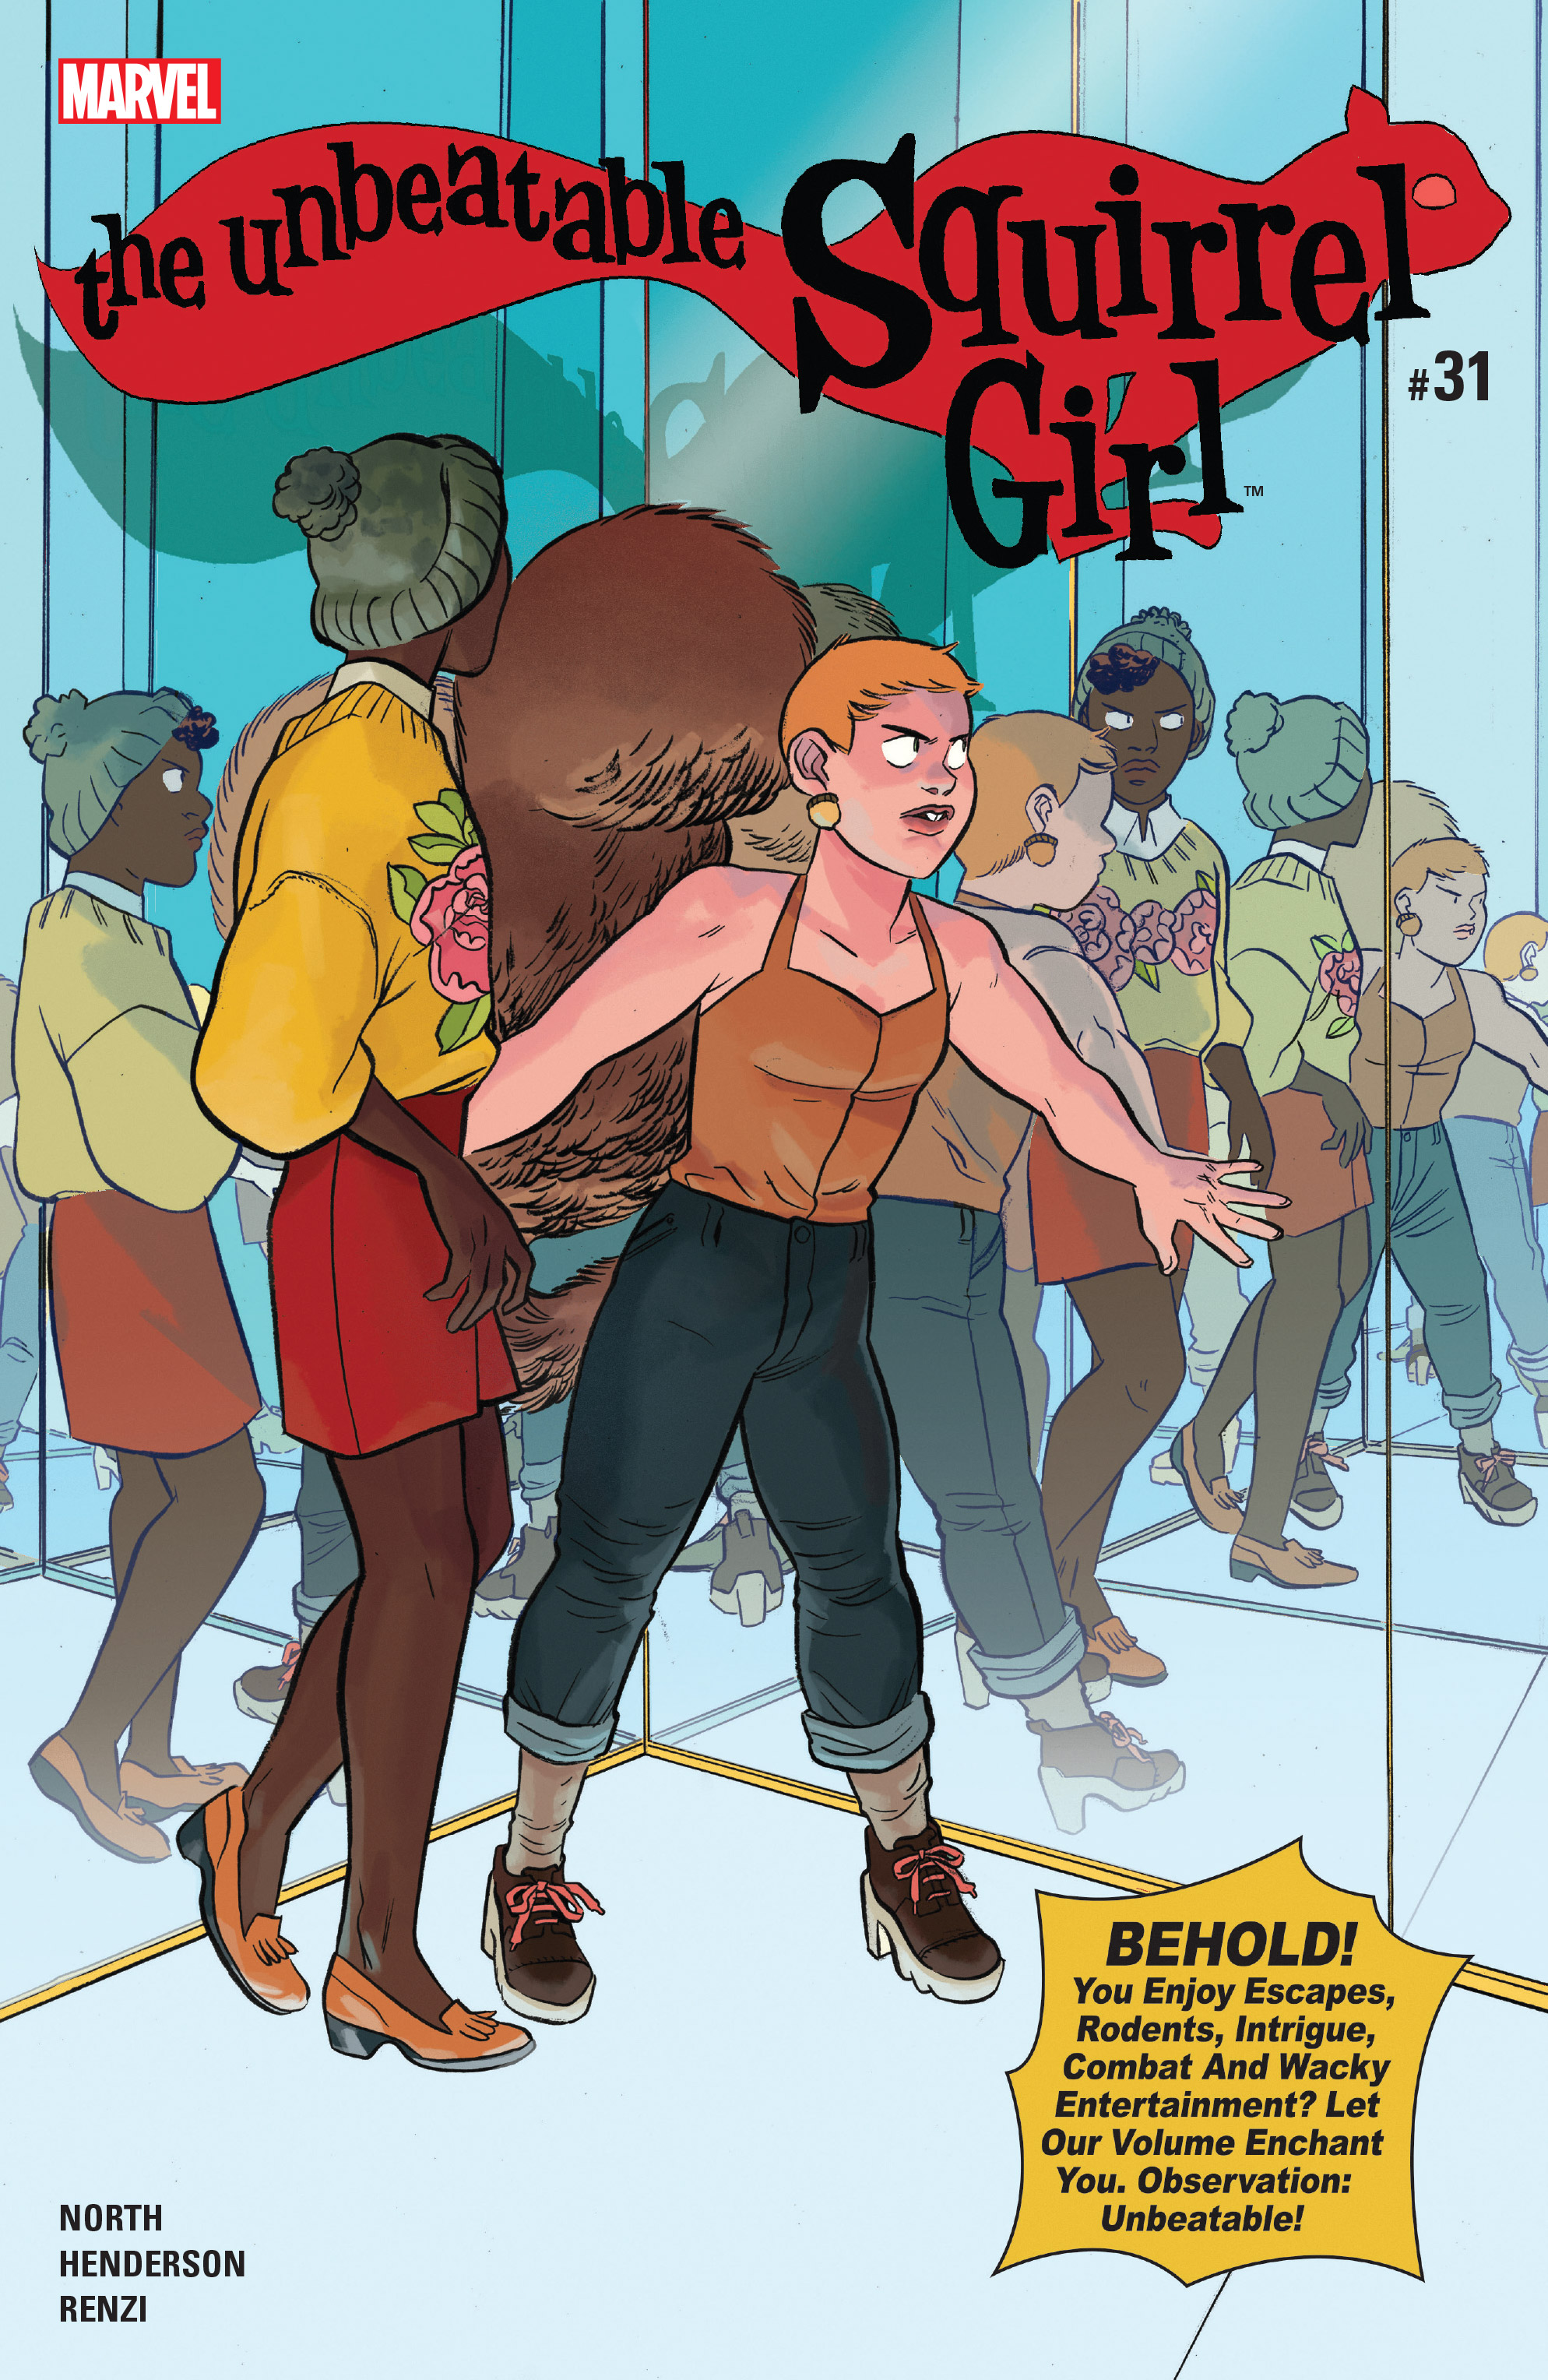 The Unbeatable Squirrel Girl Vol. 2 (2015): Chapter 31 - Page 1